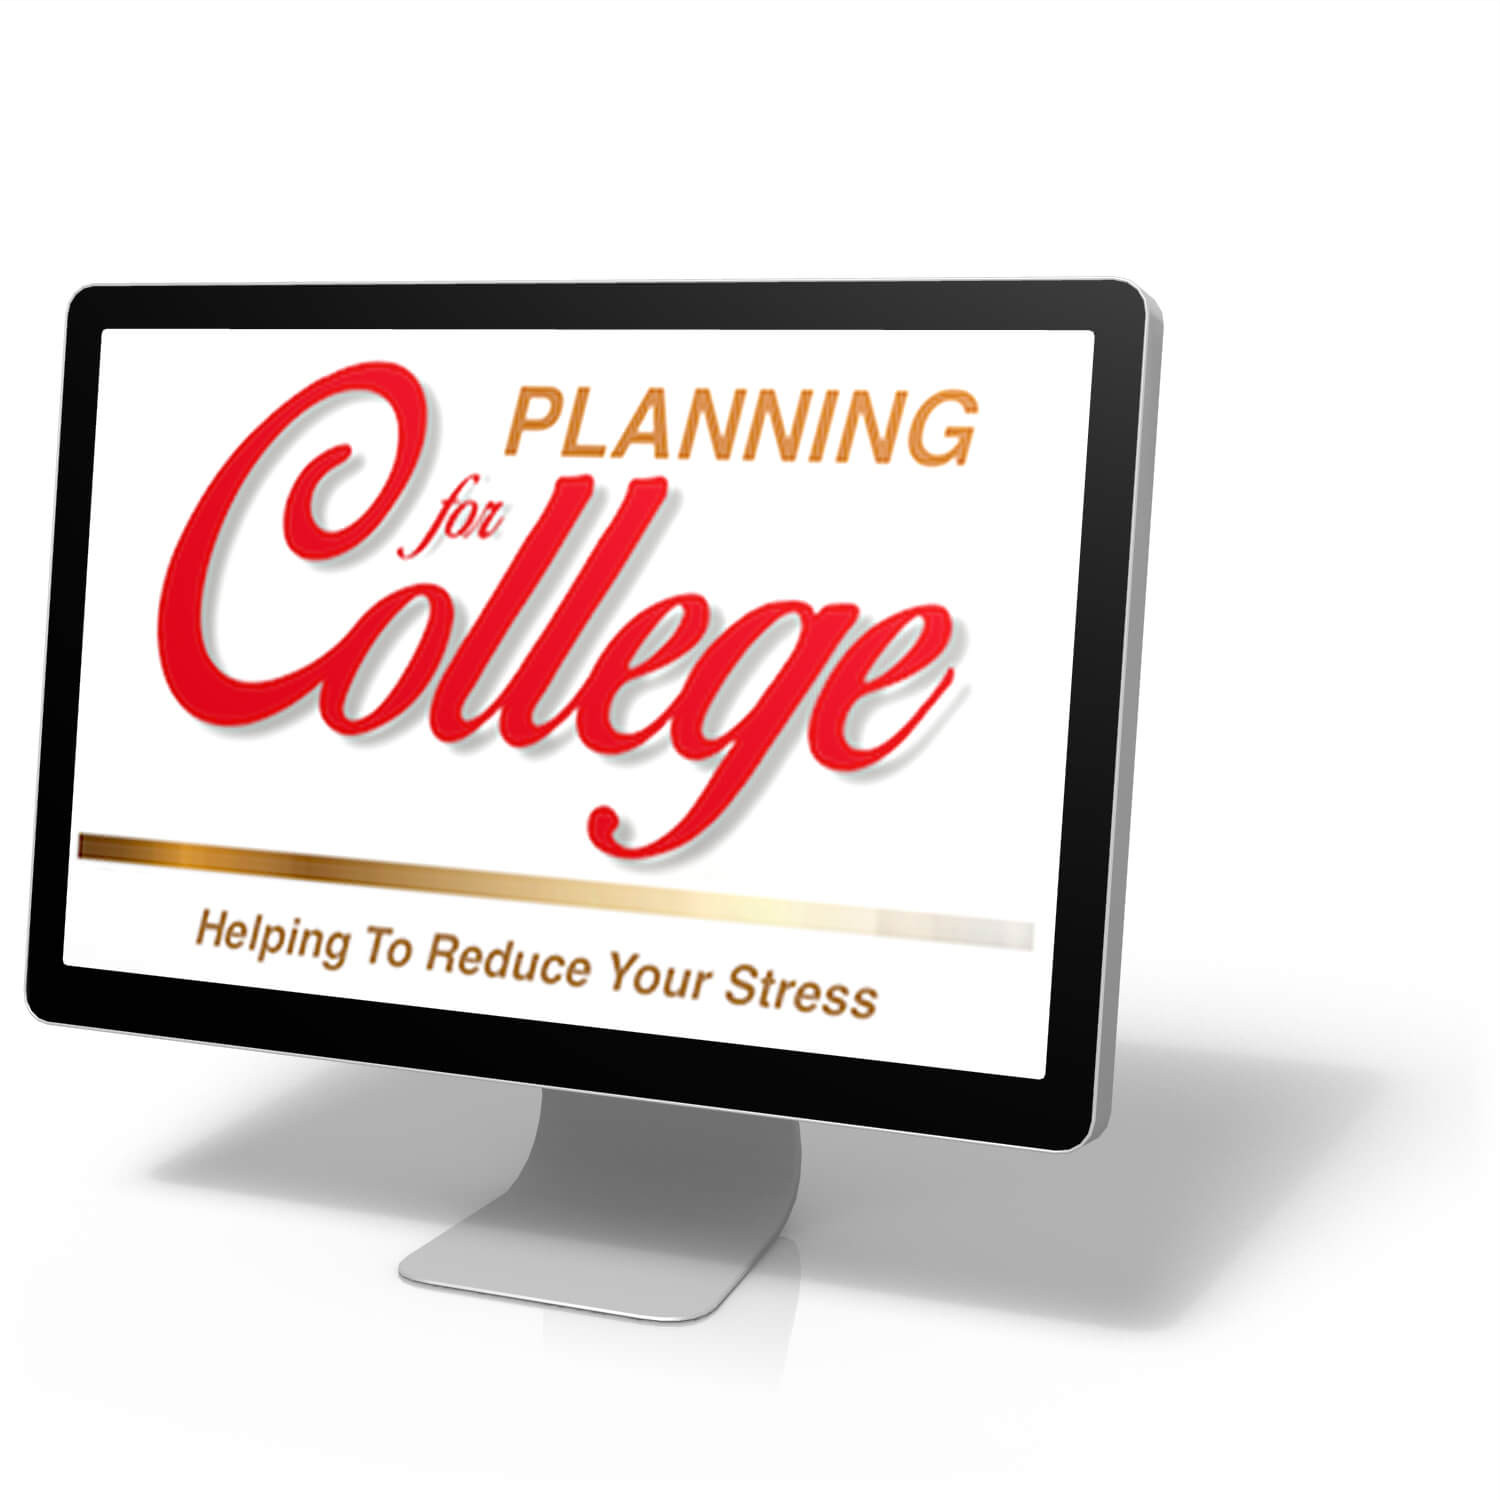 Planning Foro College